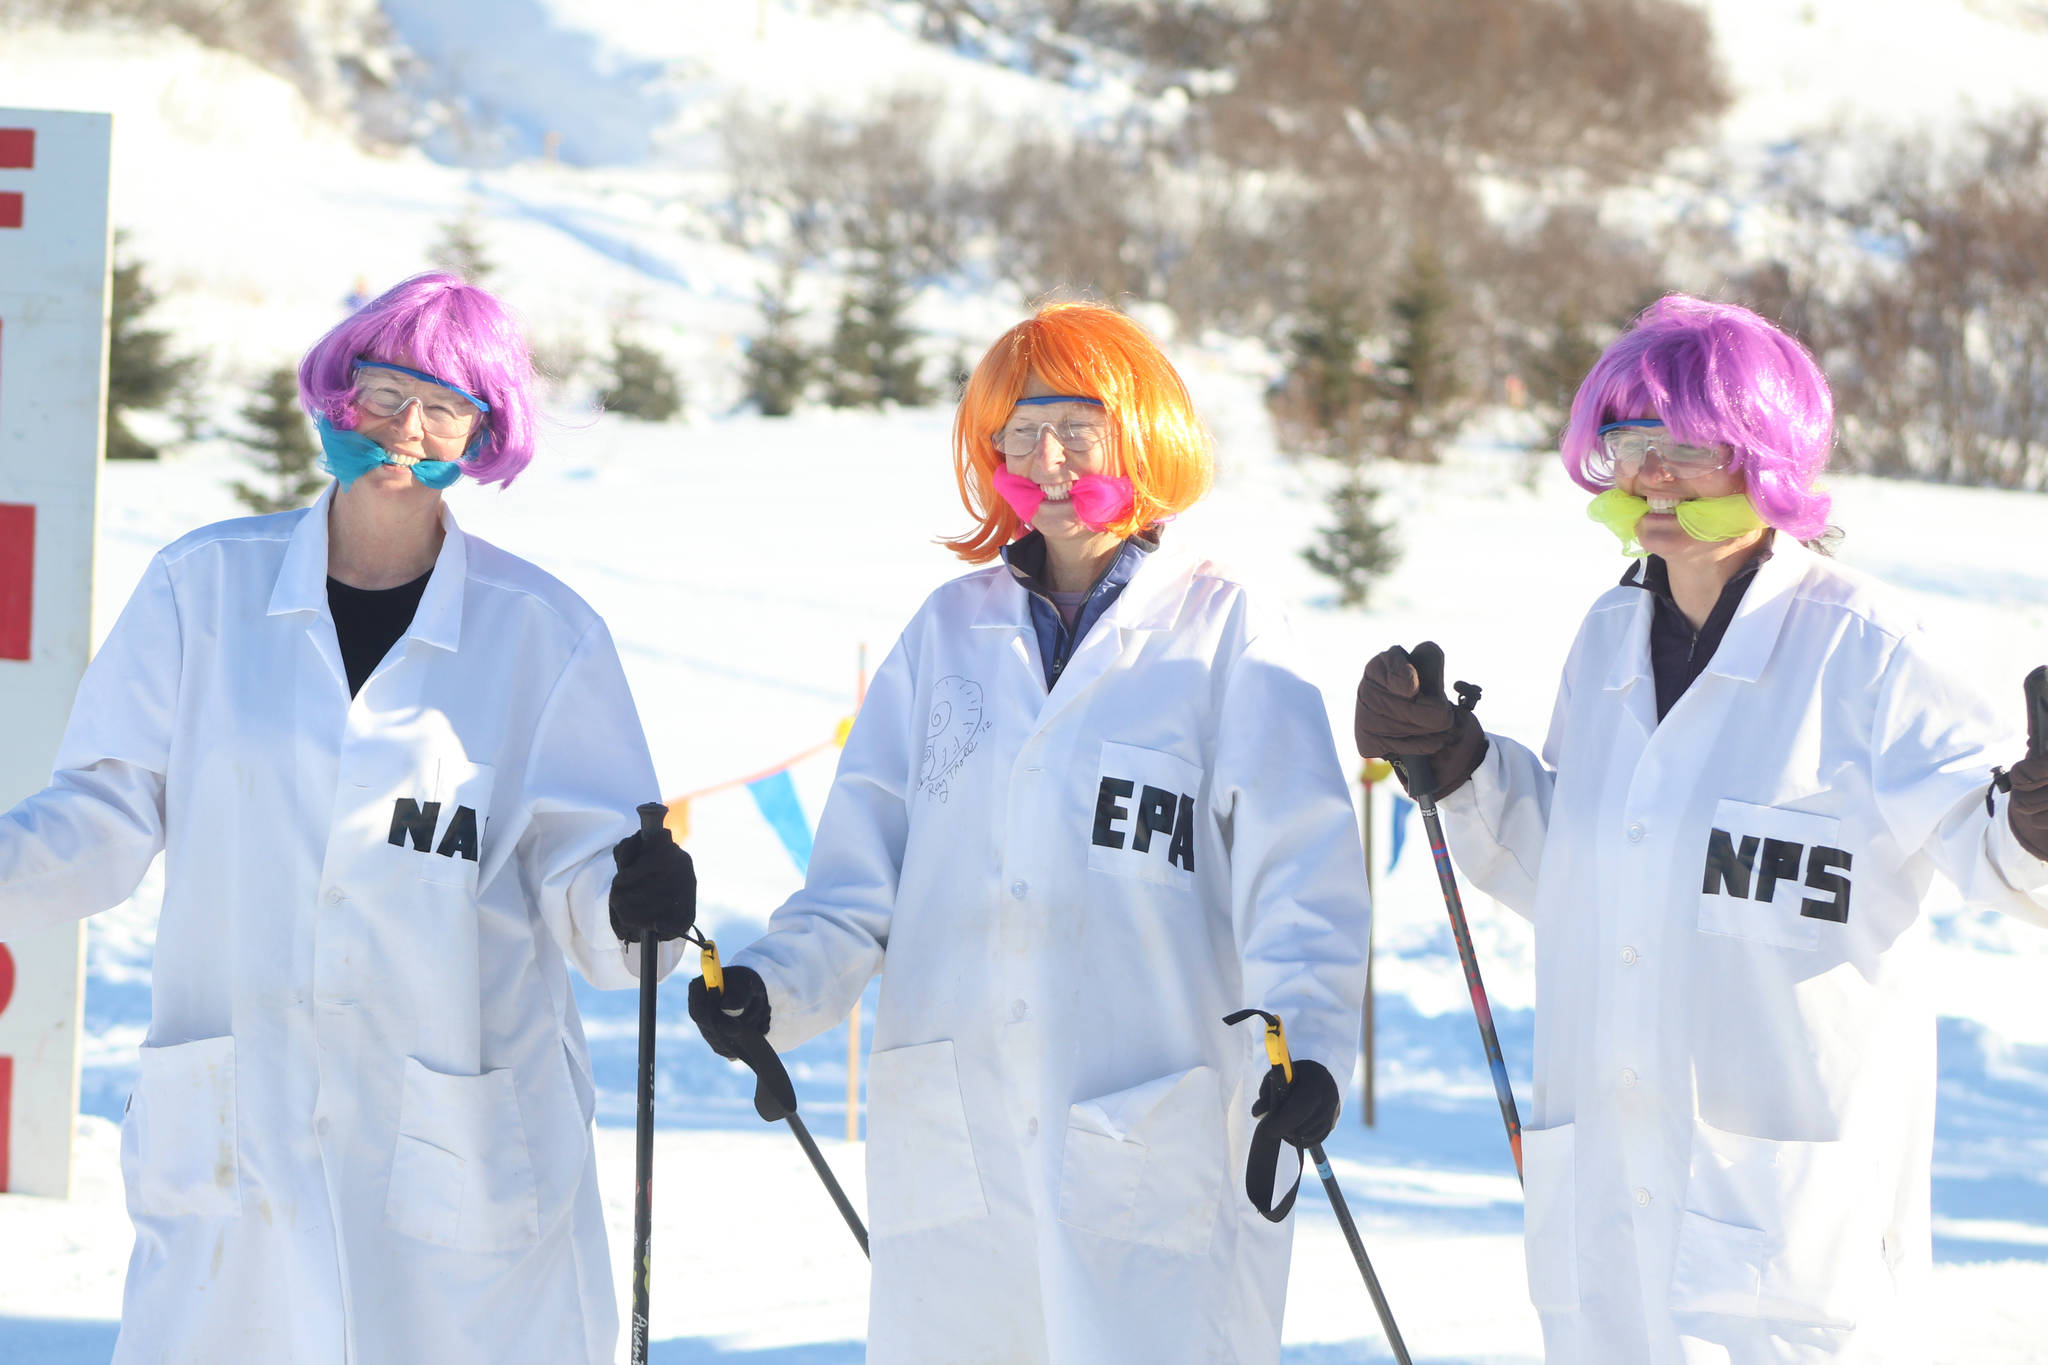 Marian Aplin, Sue Mauger and Heather Renner pose in their “Gaggle of Gagged Scientists” costume at the Ski for Women event on Feb. 5, 2017 at the Lookout Ski Trails in Homer, Alaska. (Photo by Anna Frost, Homer News)